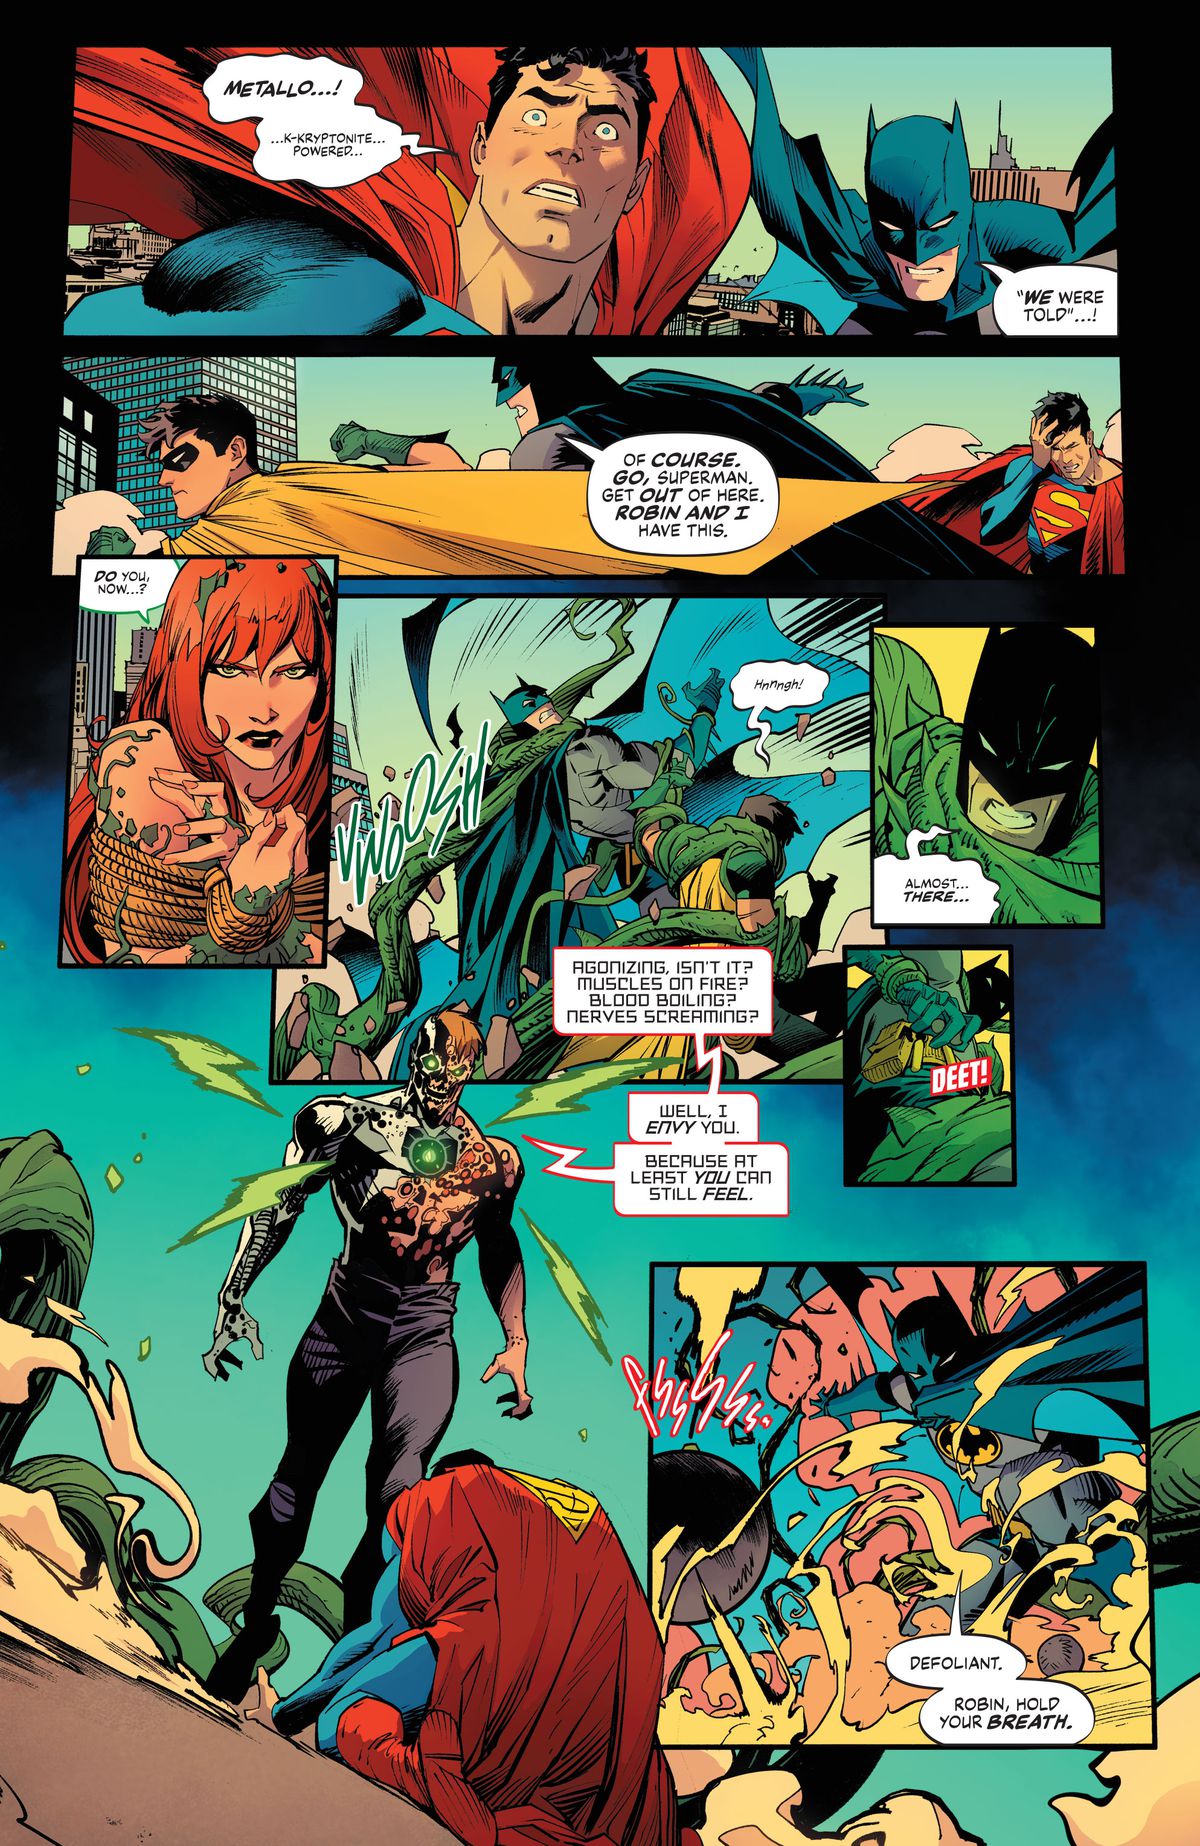 A page from the backup story of Detective Comics #1050 (2022).